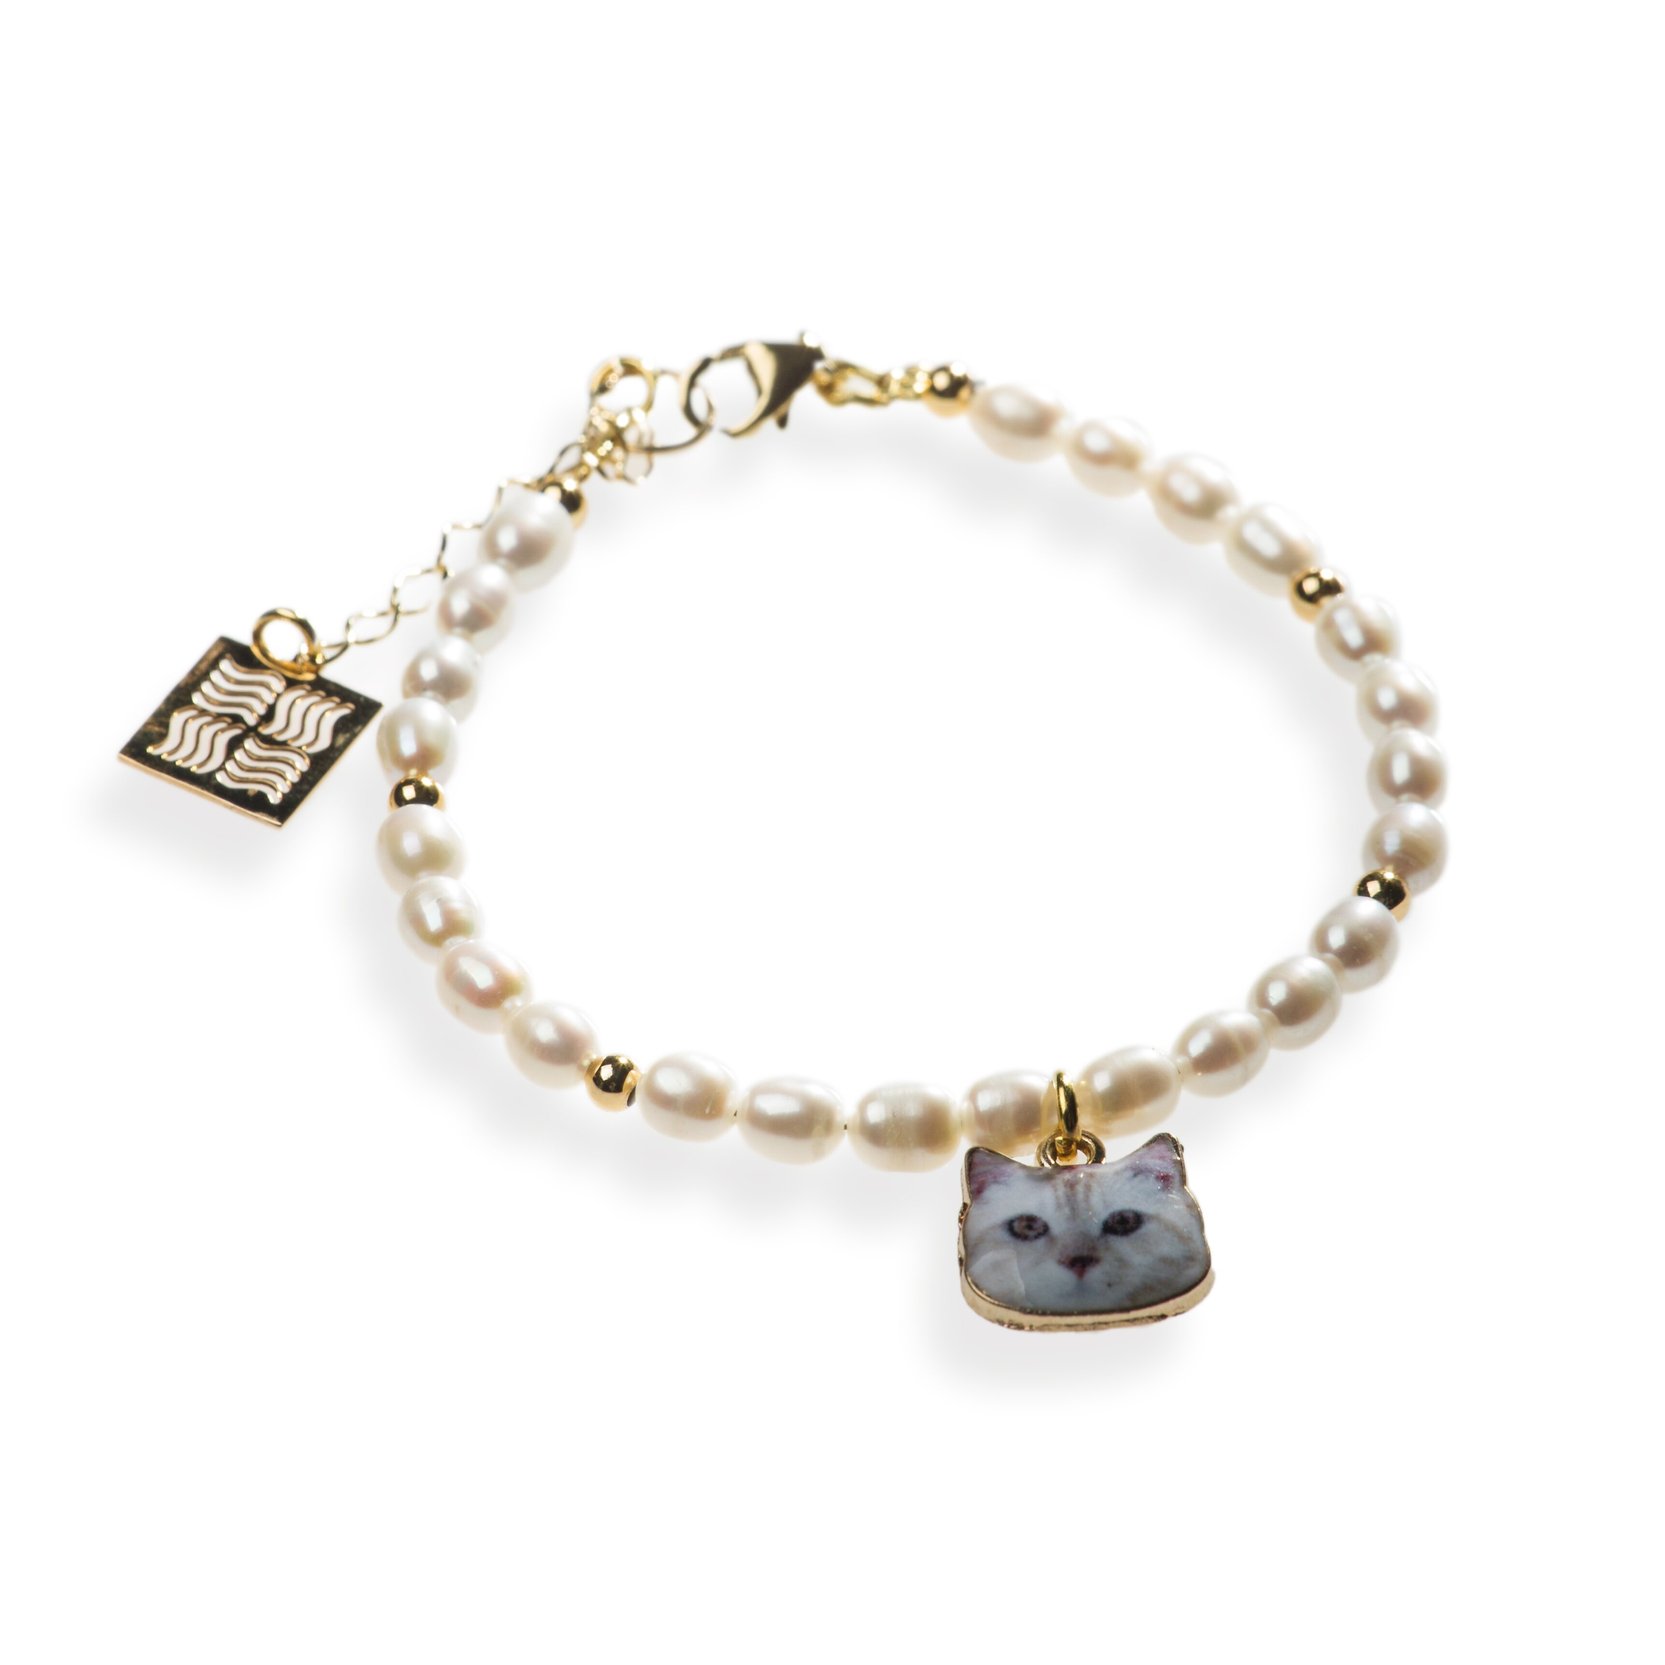 Bracelet of the collection "Six Cats"